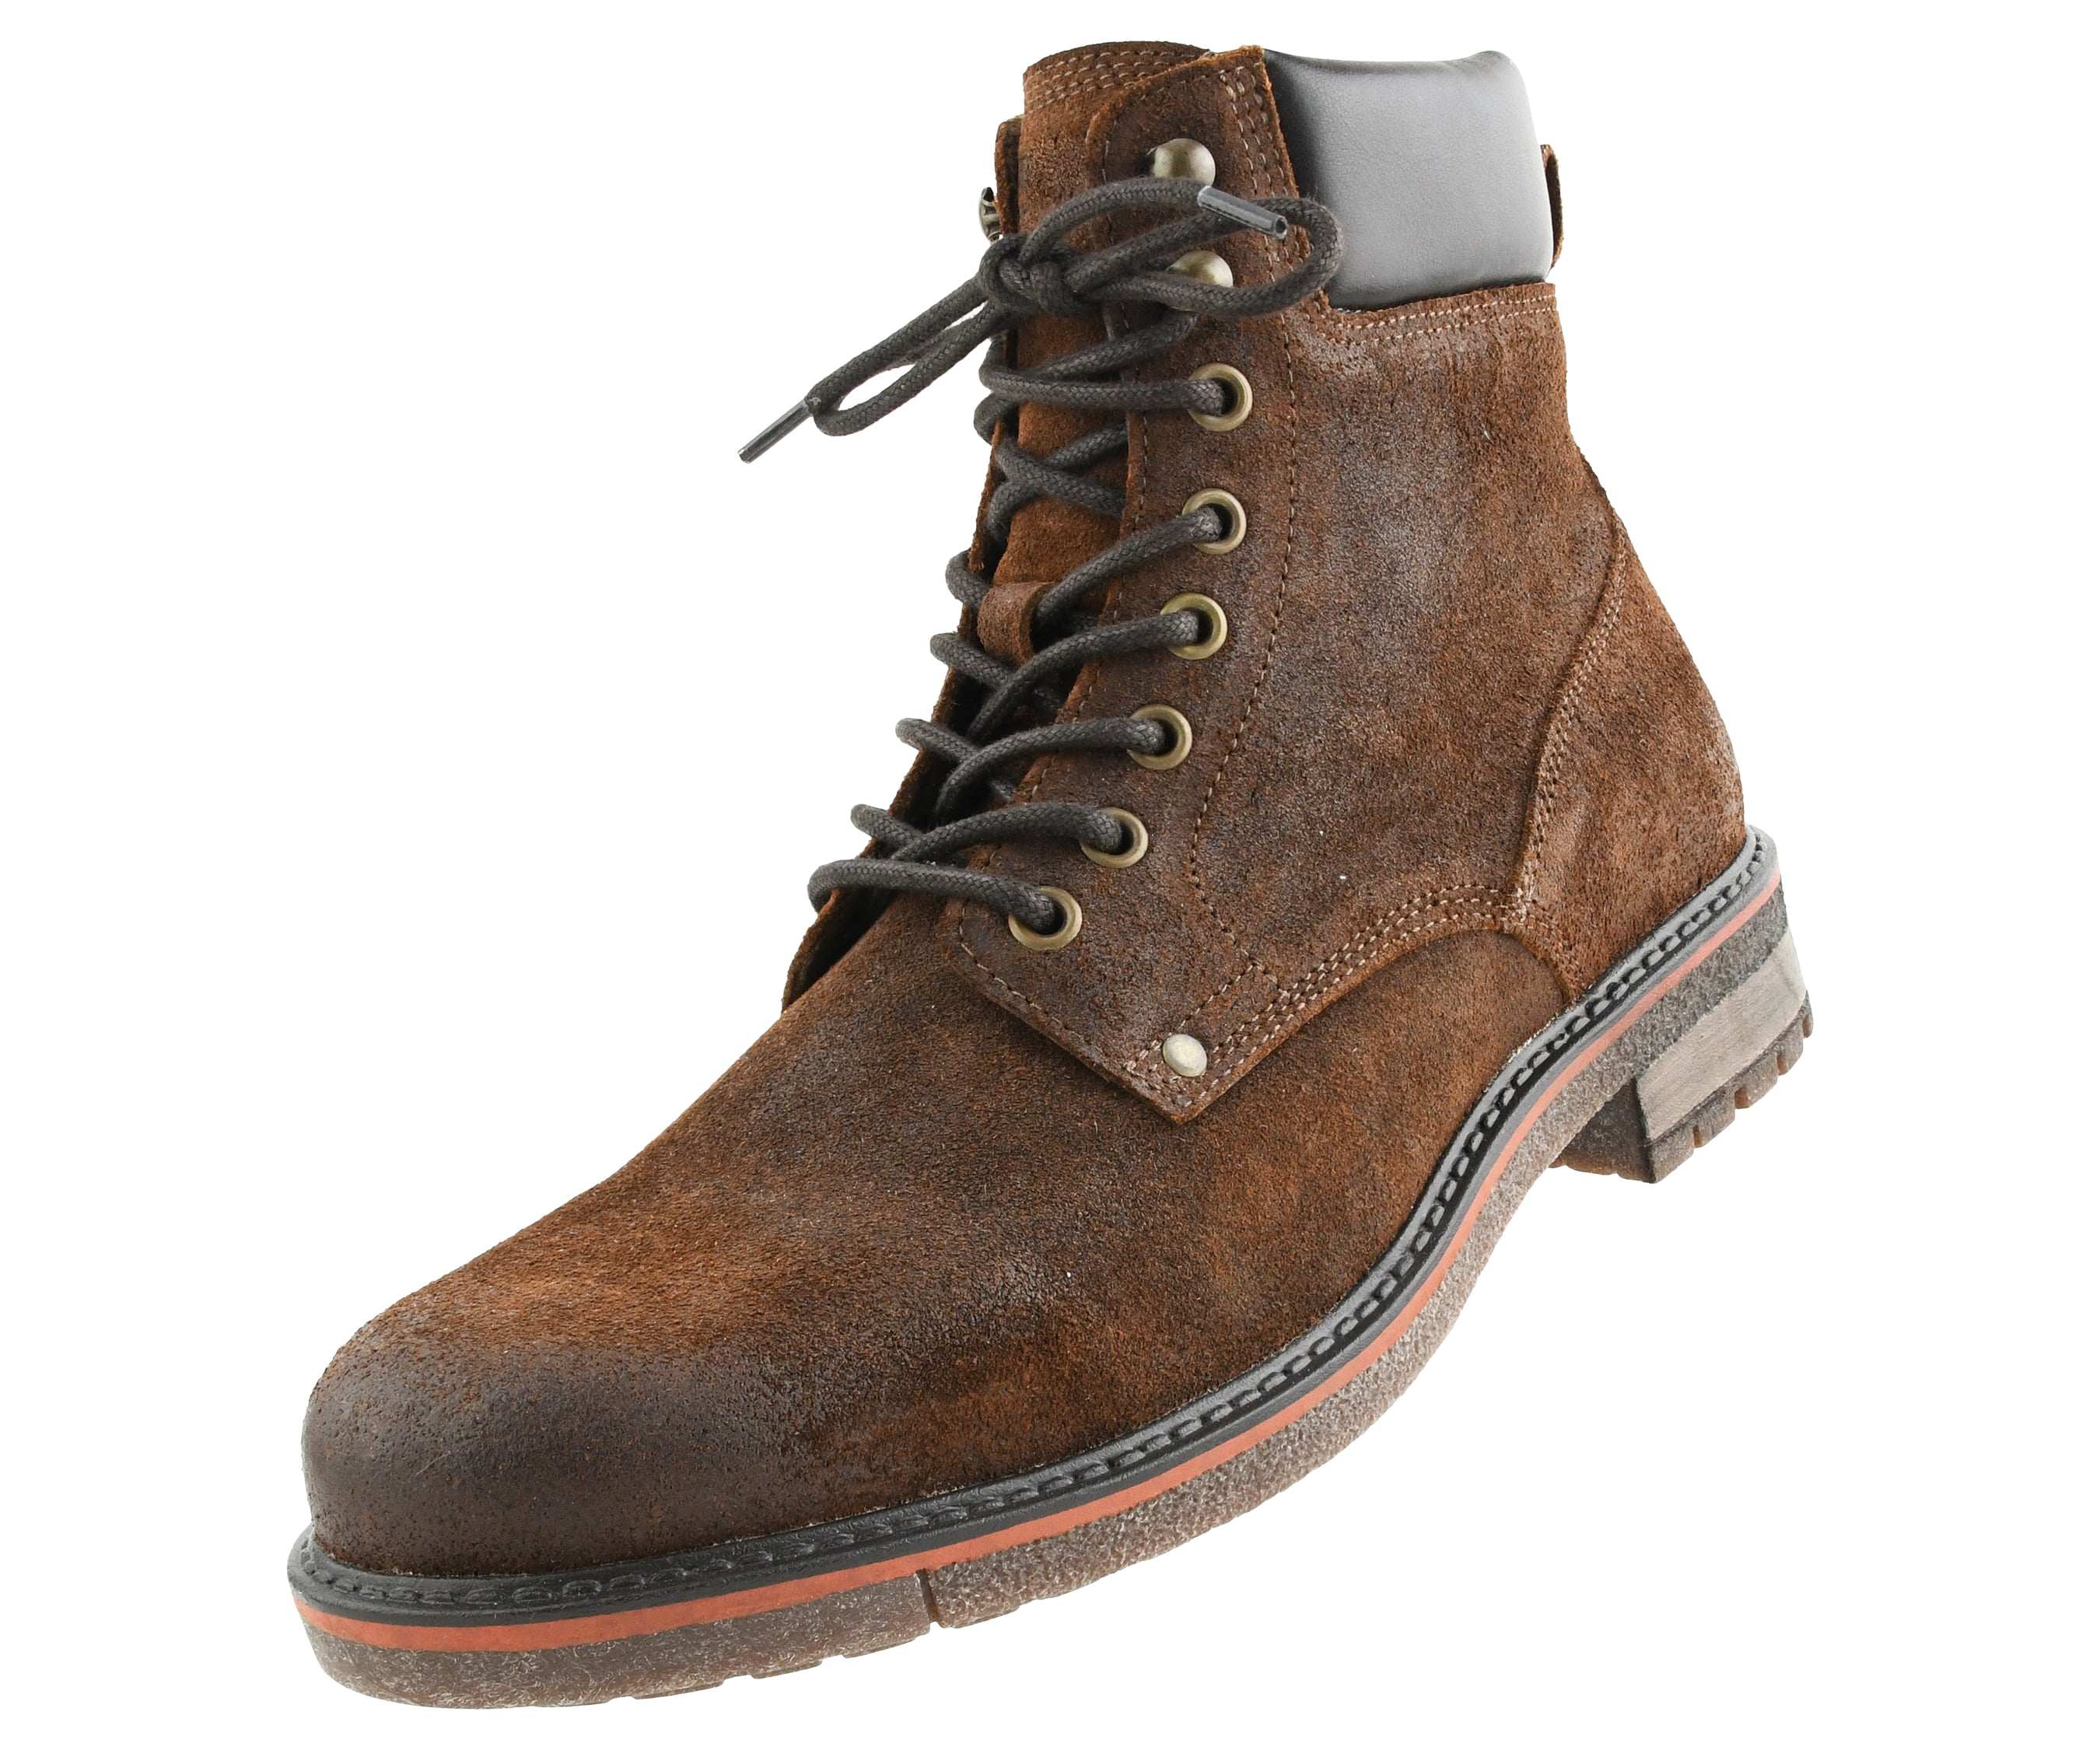 Details about  / Men/'s Safety Shoes USA Steel Toe Suede Work Boots Walking Footwear Sneaker Size